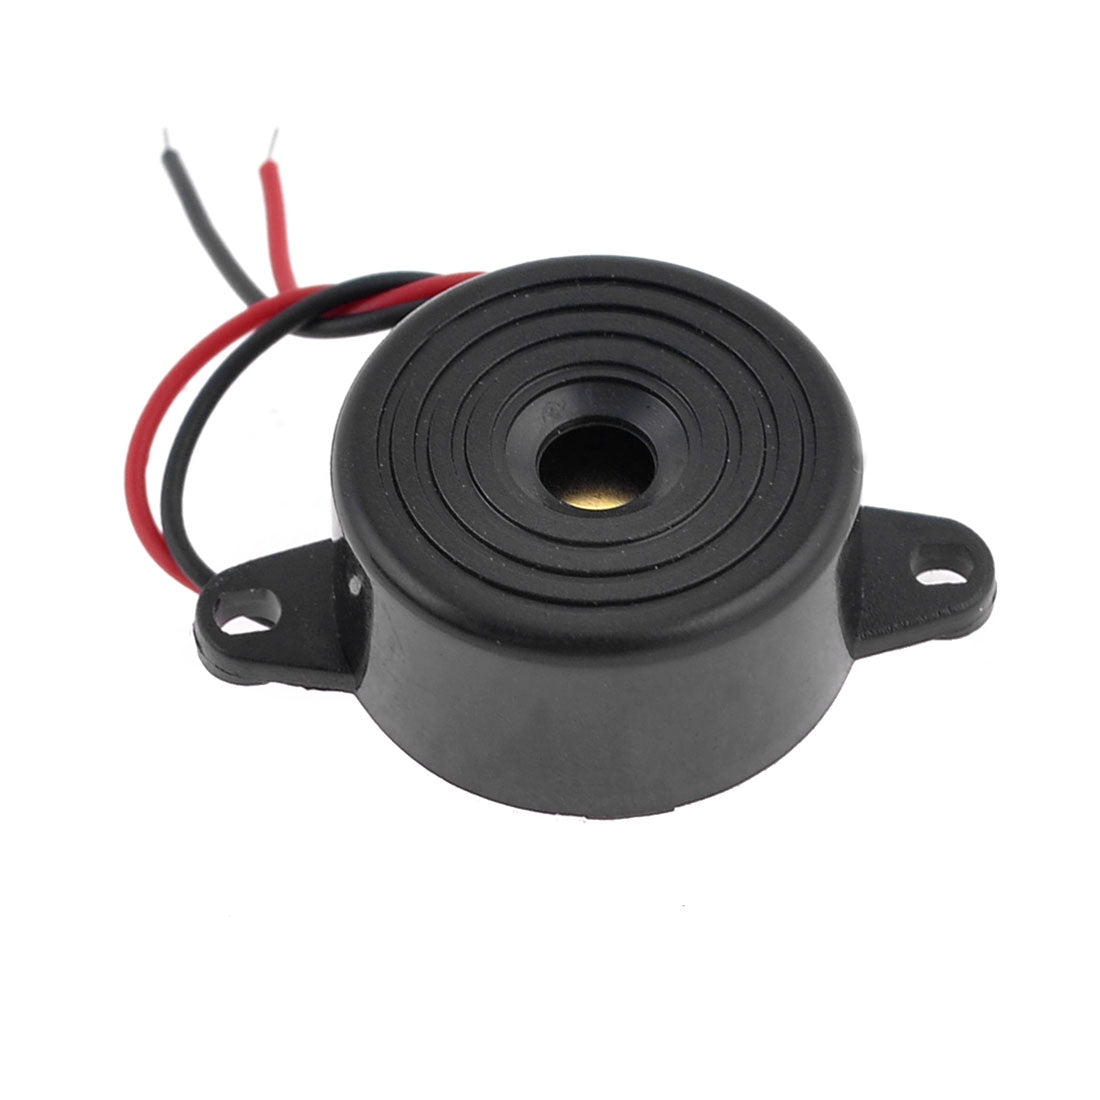 uxcell Uxcell Black Housing DC 3-24V 2 Wire Industrial Electronic Continous Sound Buzzer 90dB